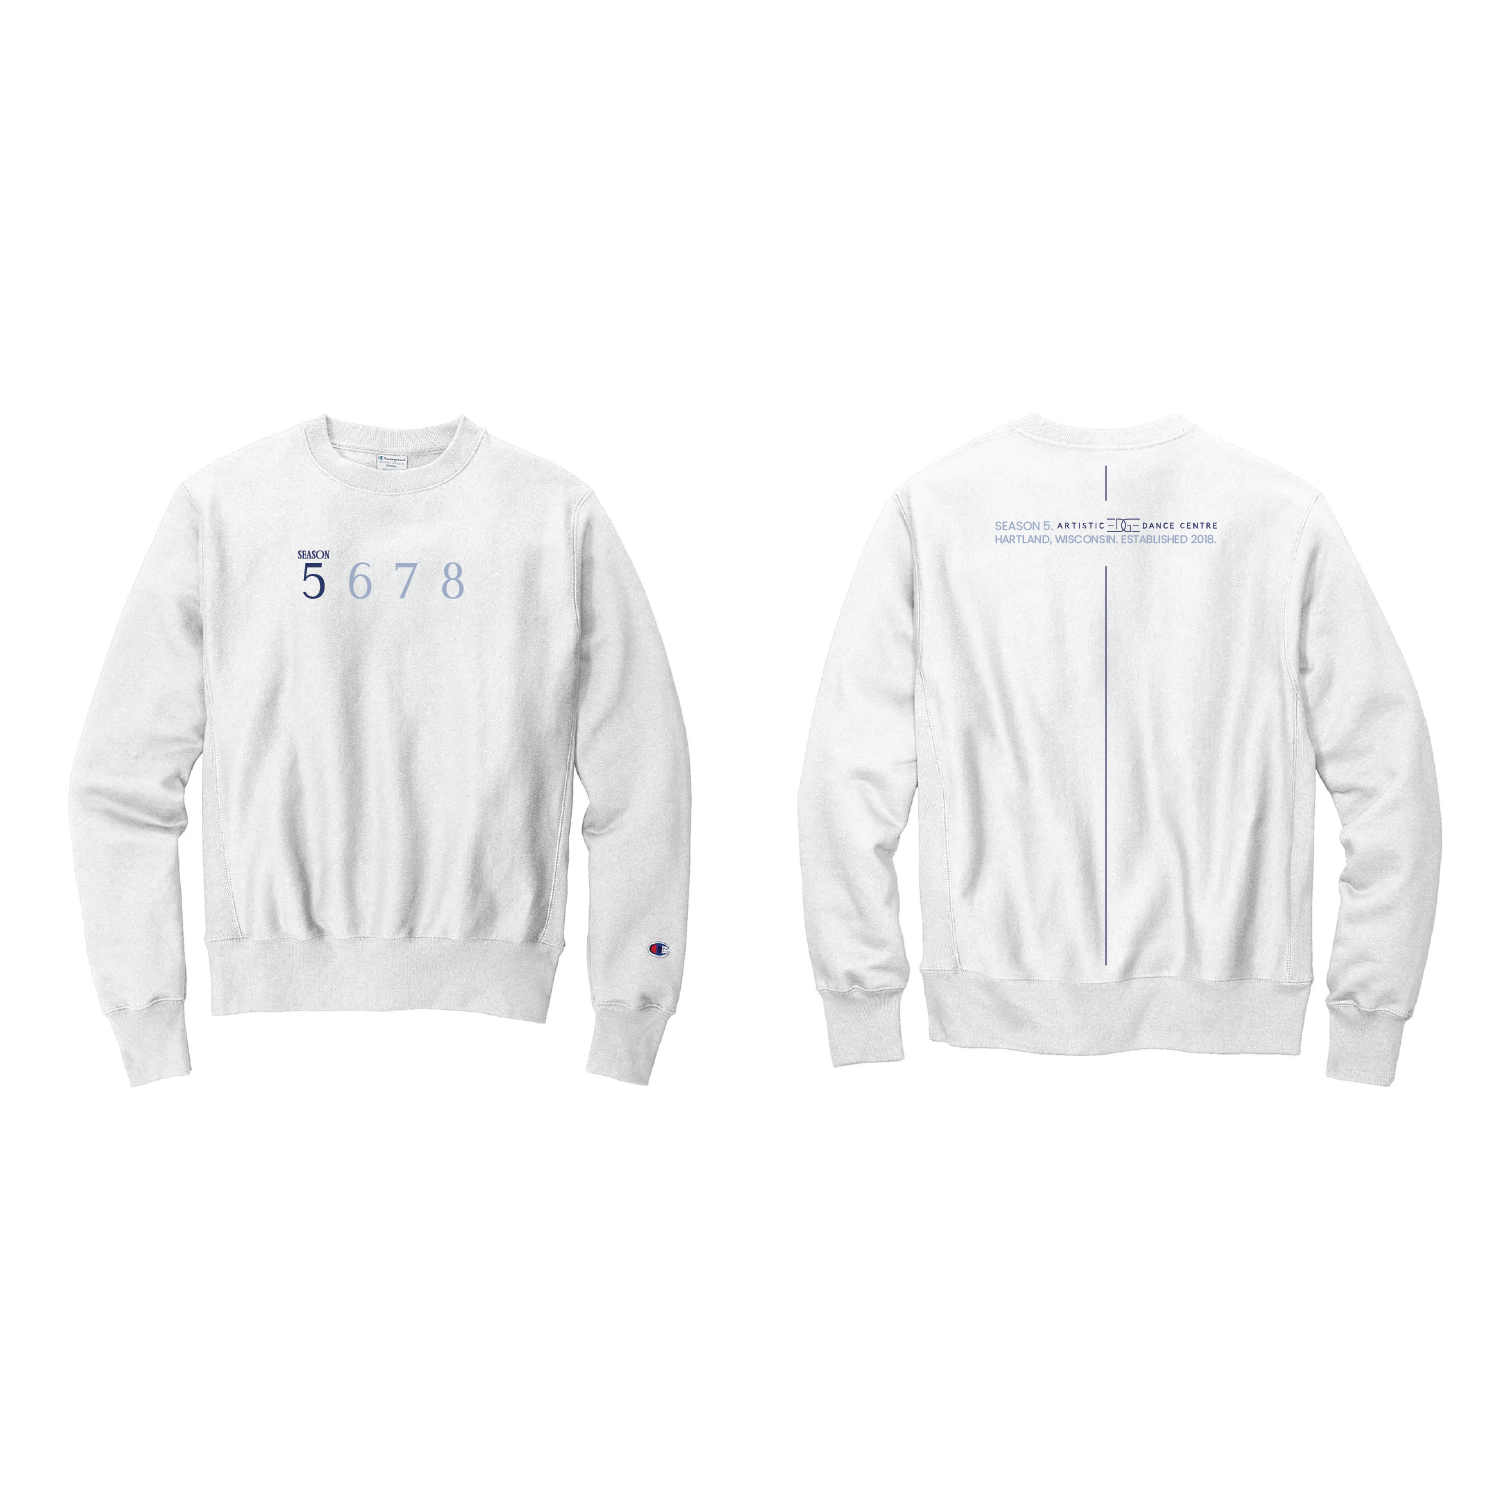 grey sweatshirt that reads 'Season 5', '6, 7, 8' on the front, and 'Season V, Artistic Edge Dance Centre, Hartland, Wisconsin, Established 2018' on the back